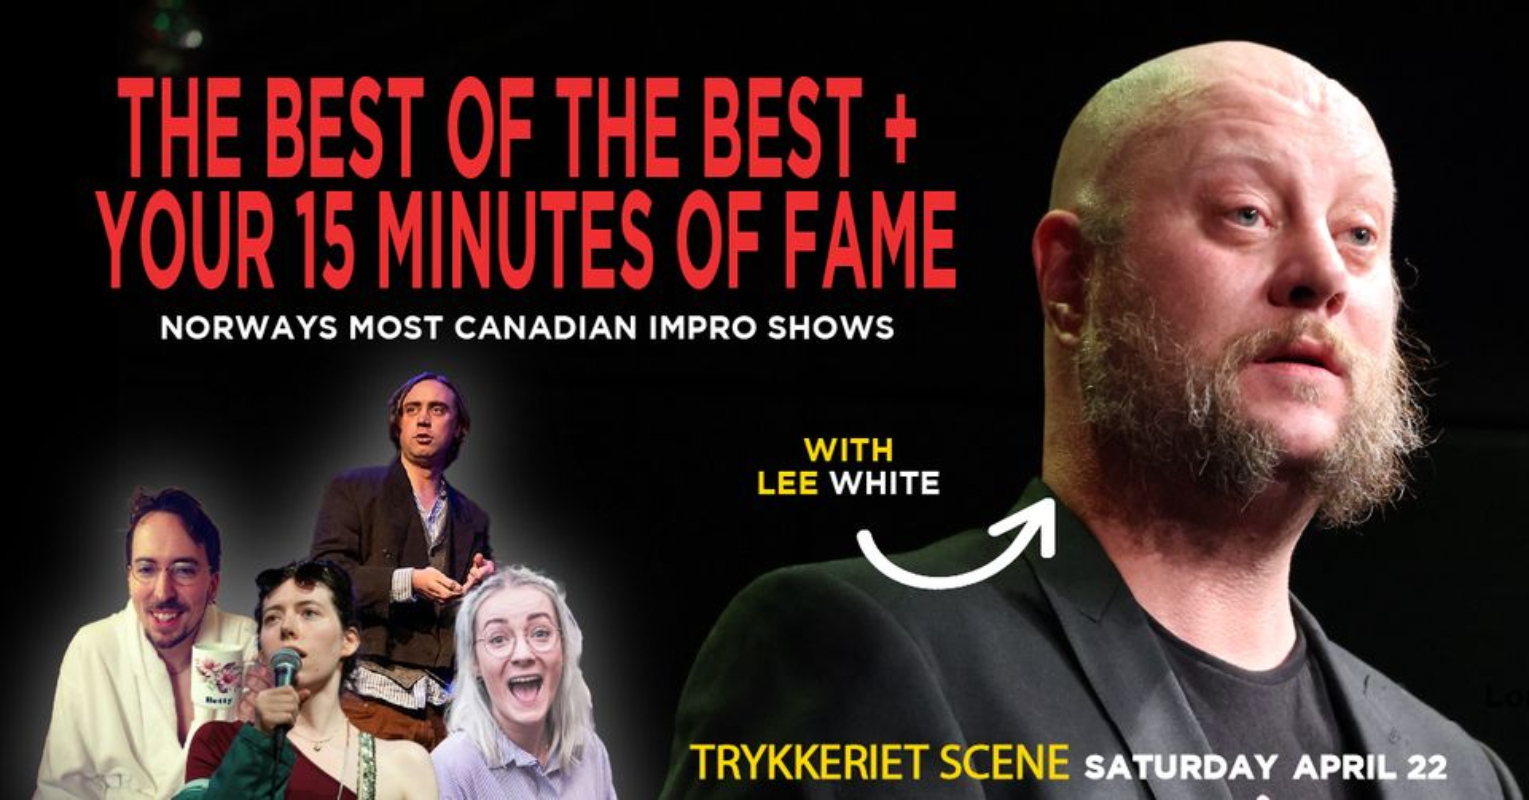 The Best of the Best + Your 15 Minutes of Fame